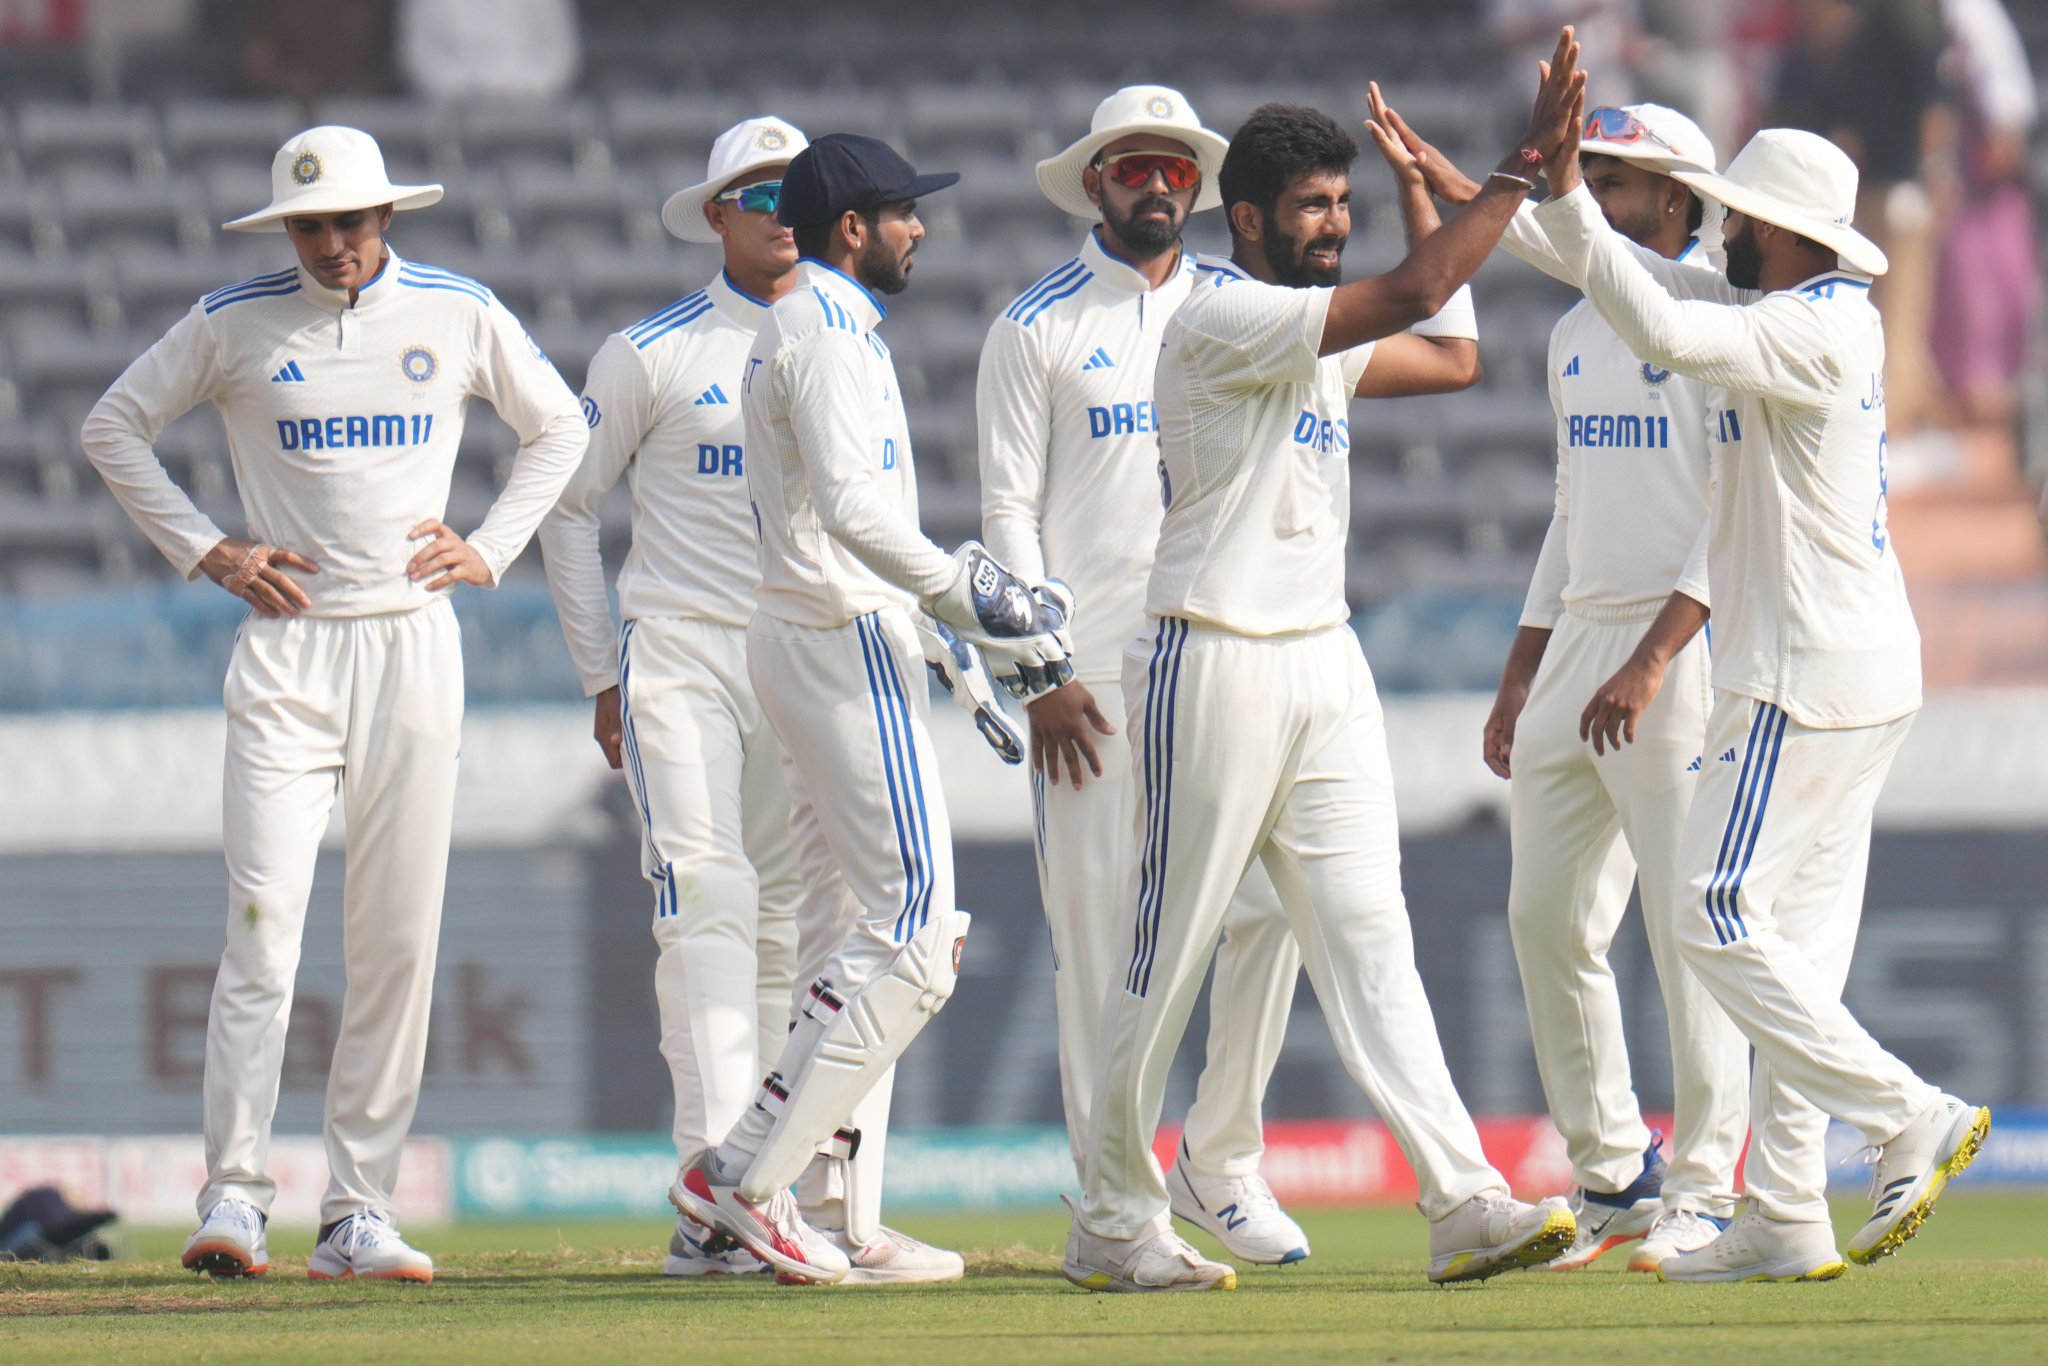 IND vs ENG 3rd Test: Fantasy Tips, Predicted XI, Pitch Report